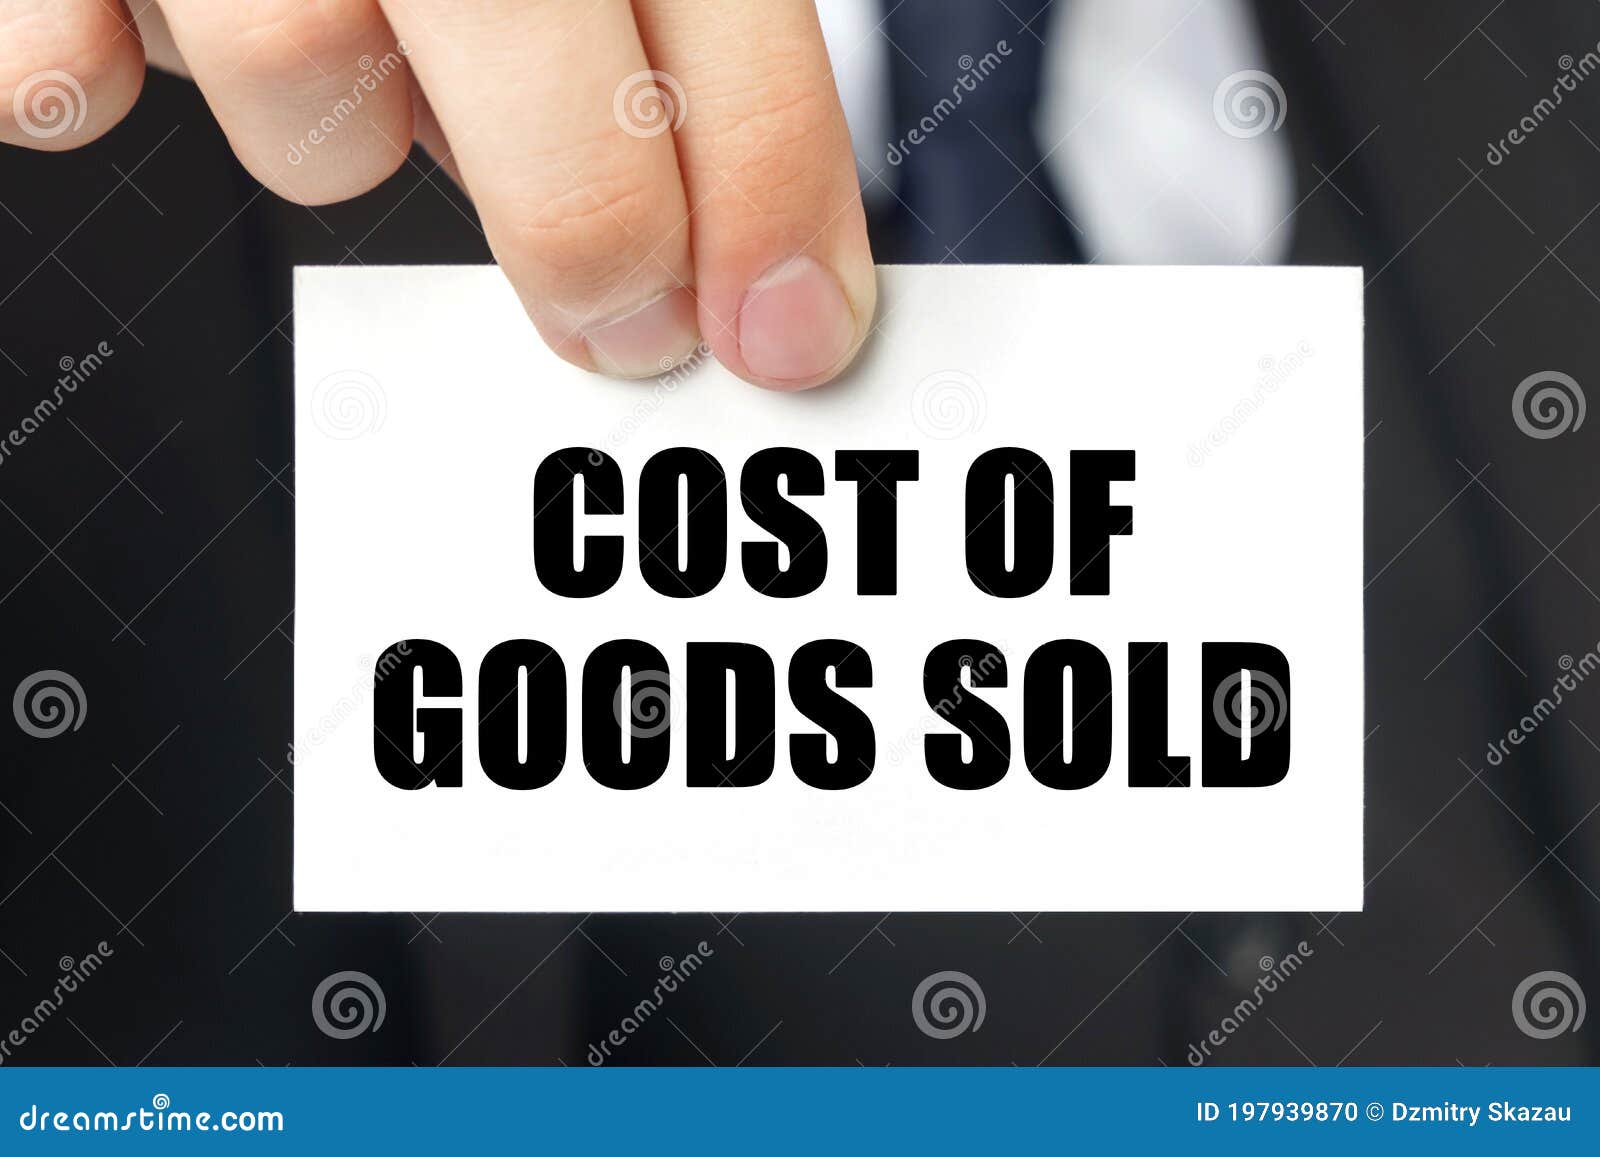 businessman shows a card with the text - cost of goods sold